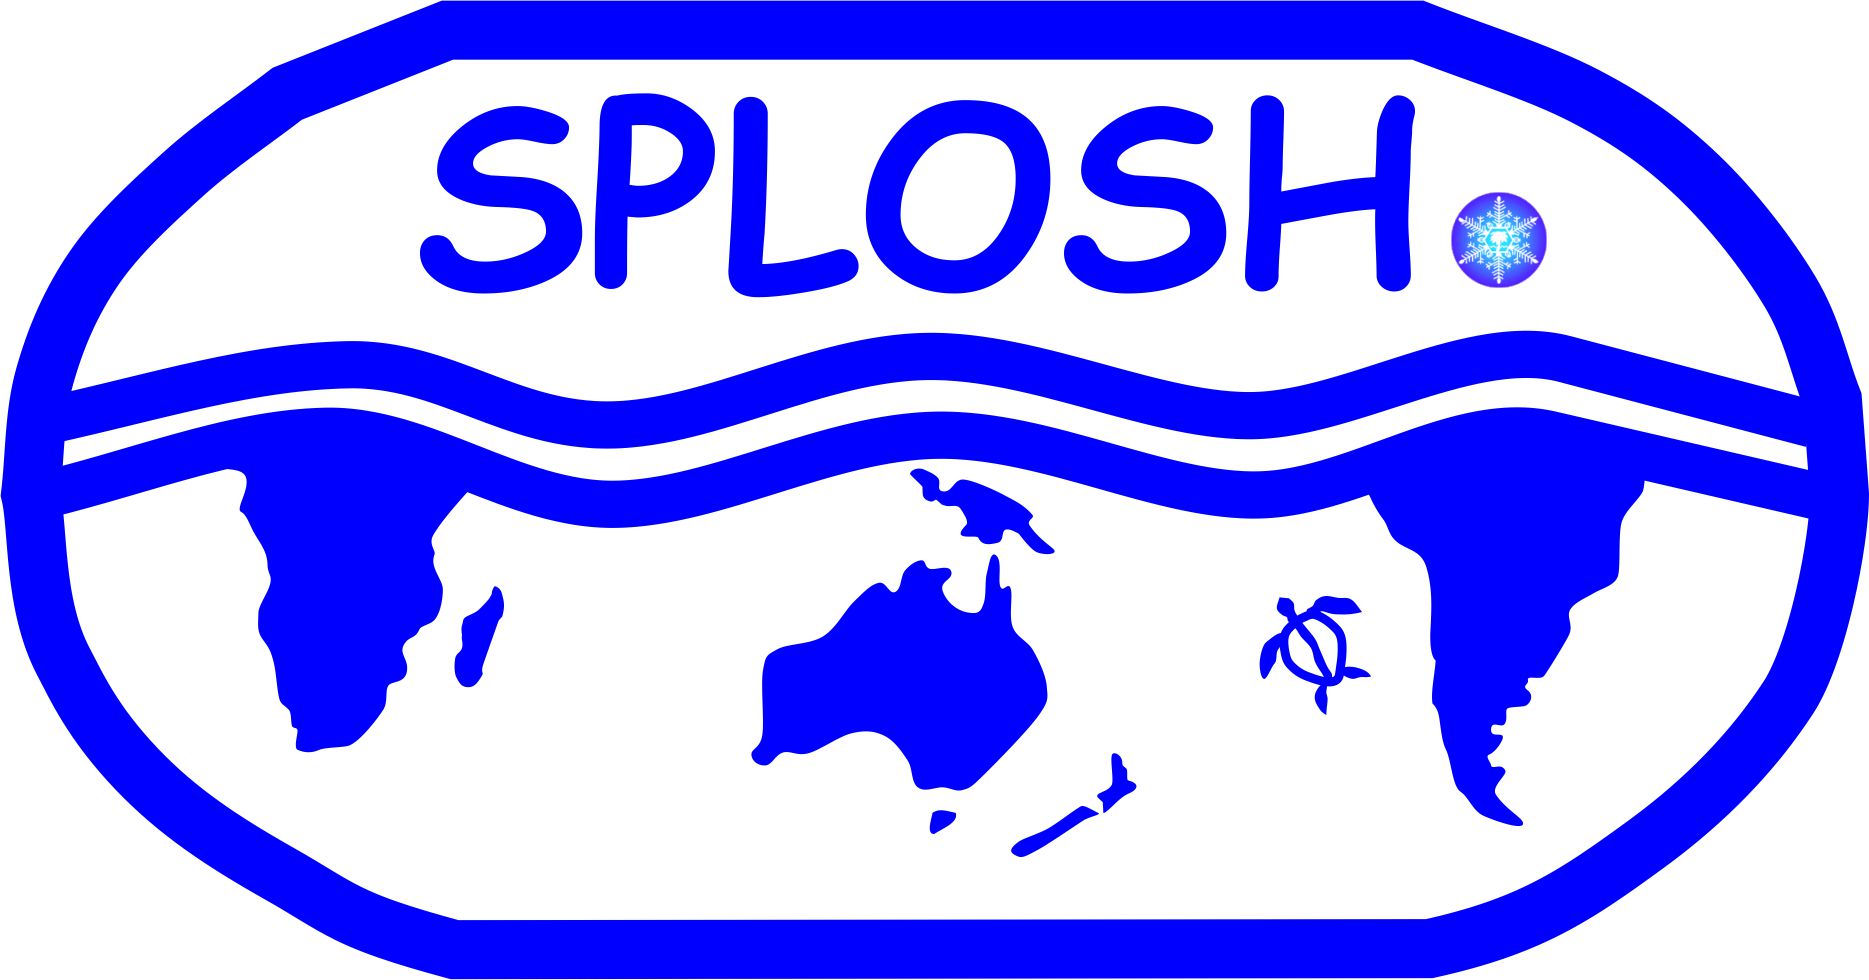 You are currently viewing SPLOSH 2020 – Workshop on Southern Hemisphere perspectives on Submerged Palaeolandscapes